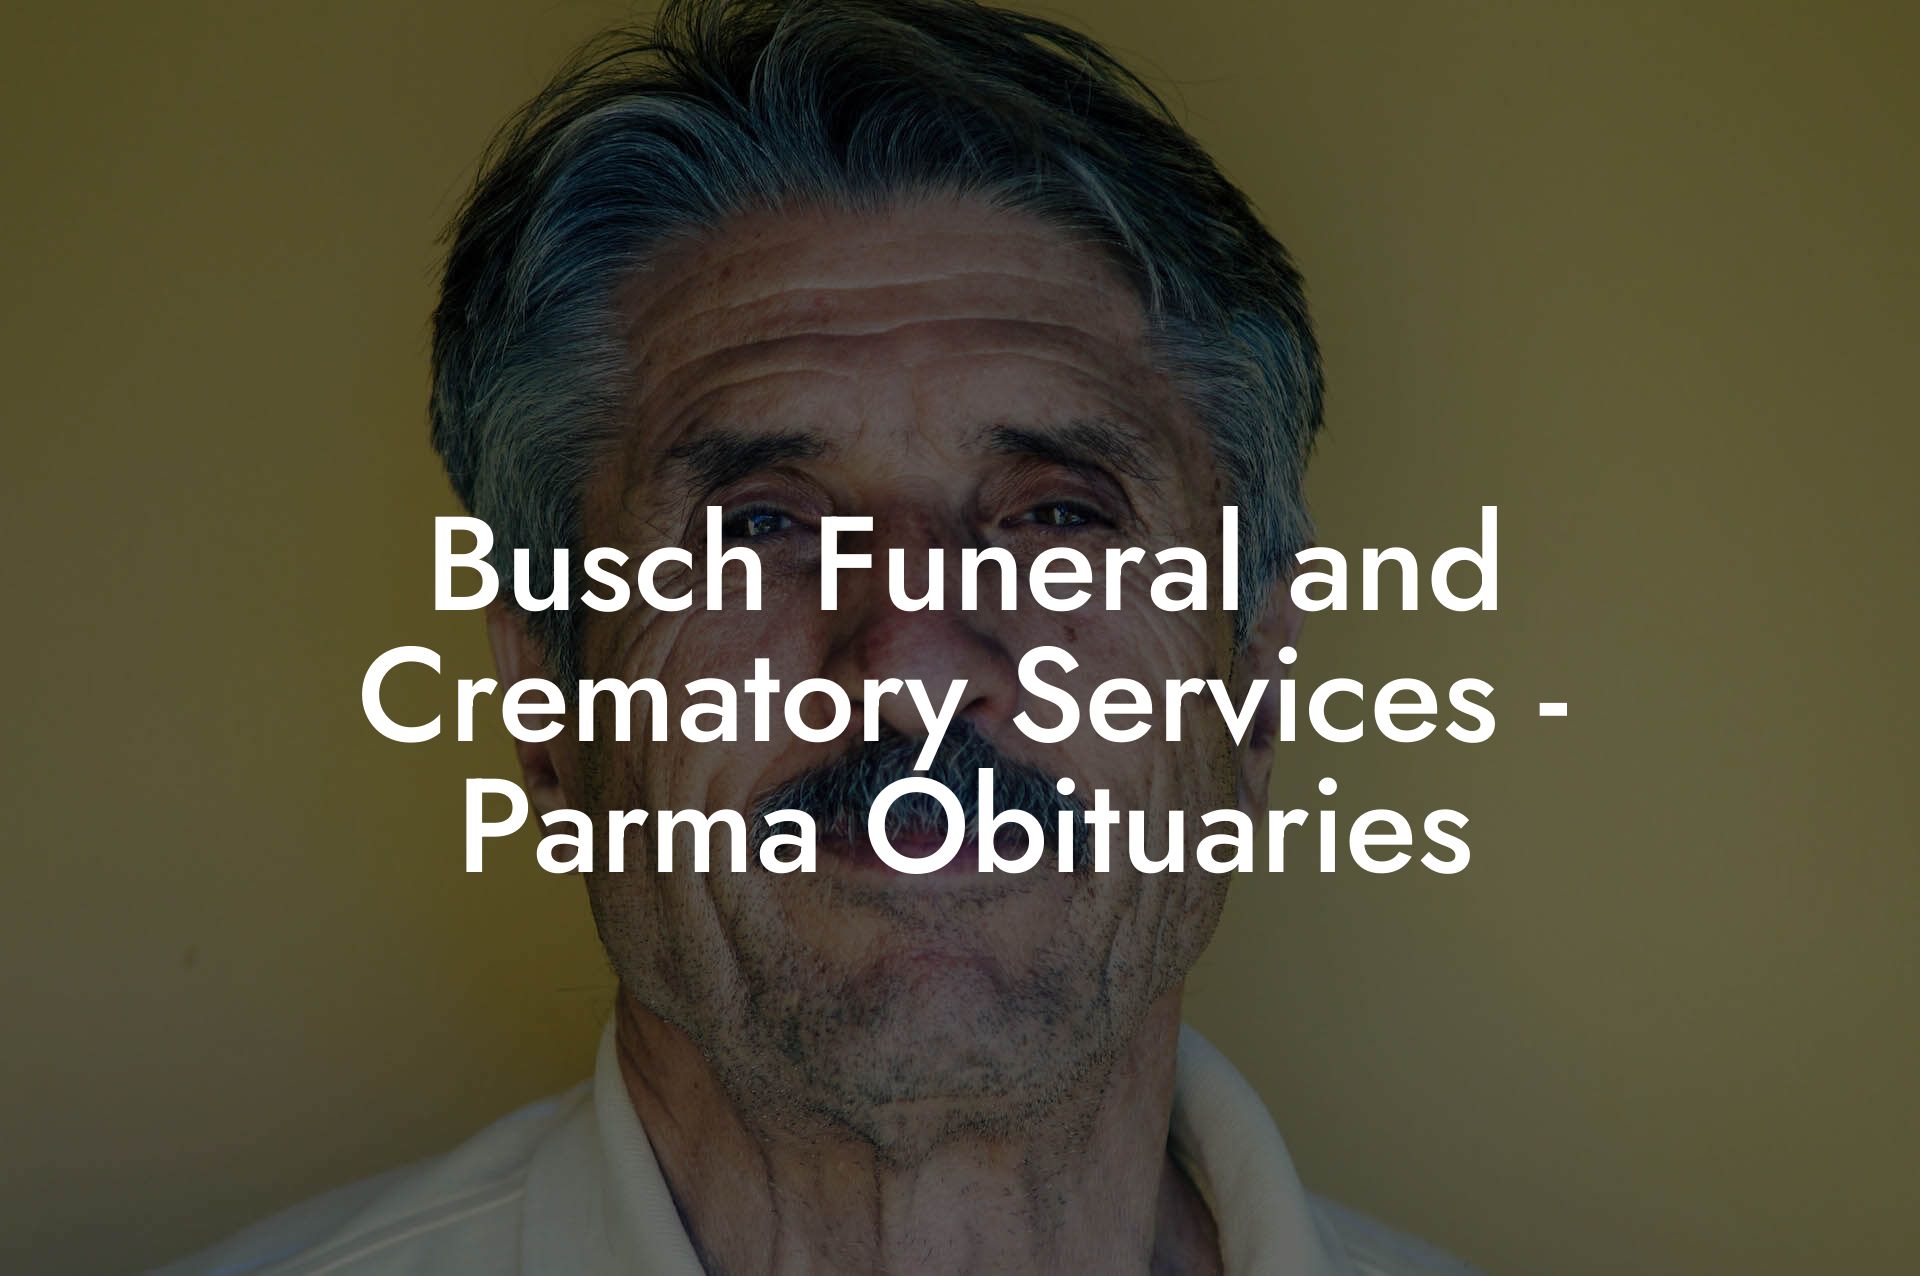 Busch Funeral and Crematory Services - Parma Obituaries